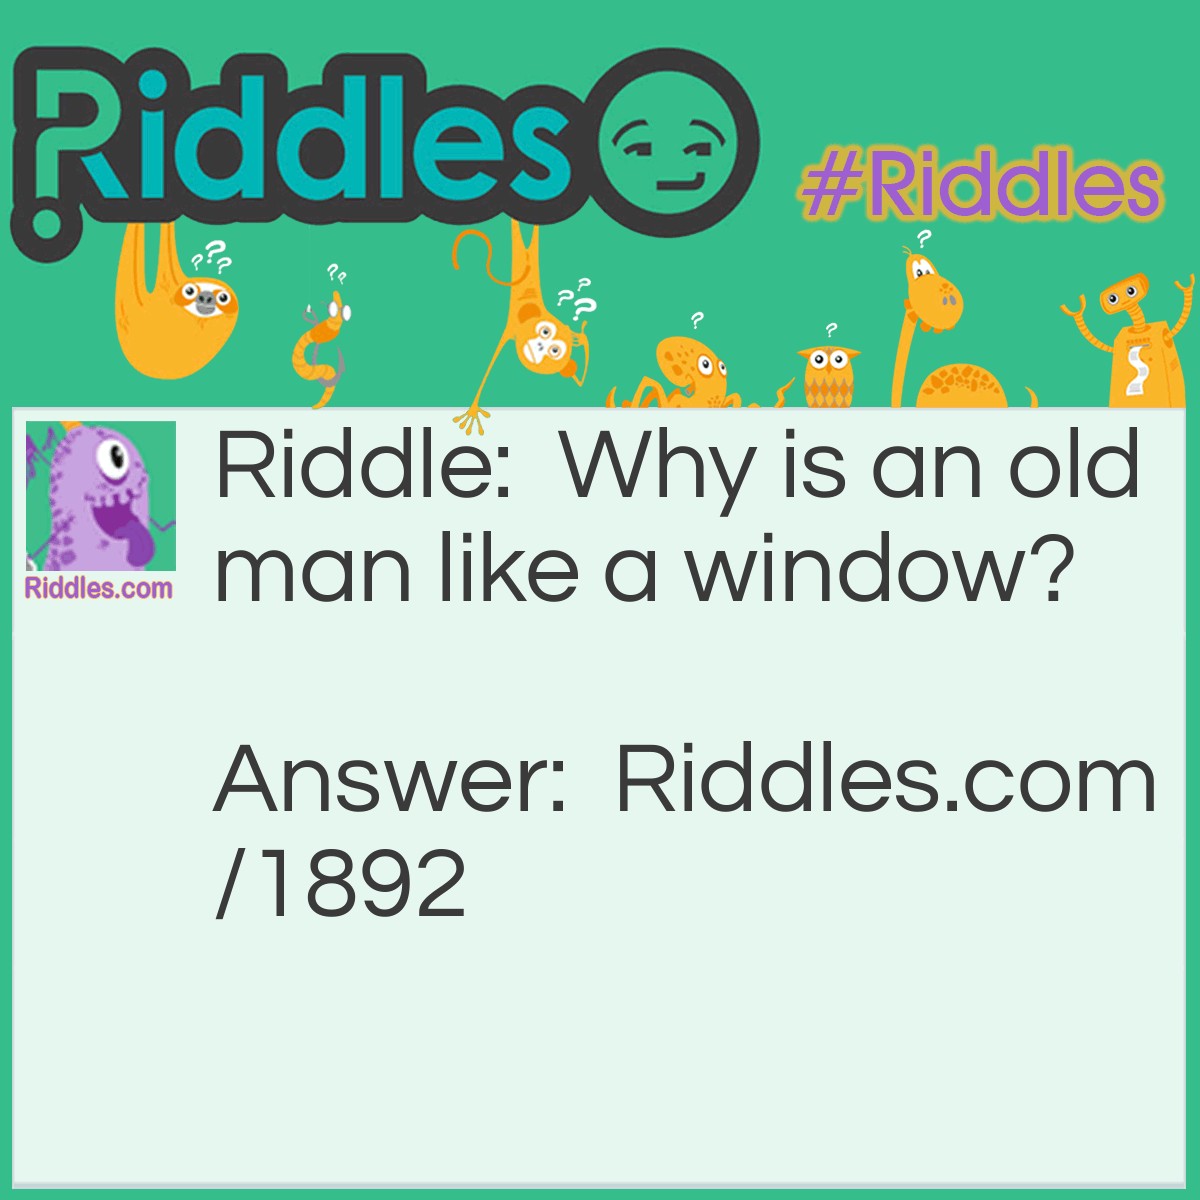 Riddle: Why is an old man like a window? Answer: Because he is full of pains (panes).